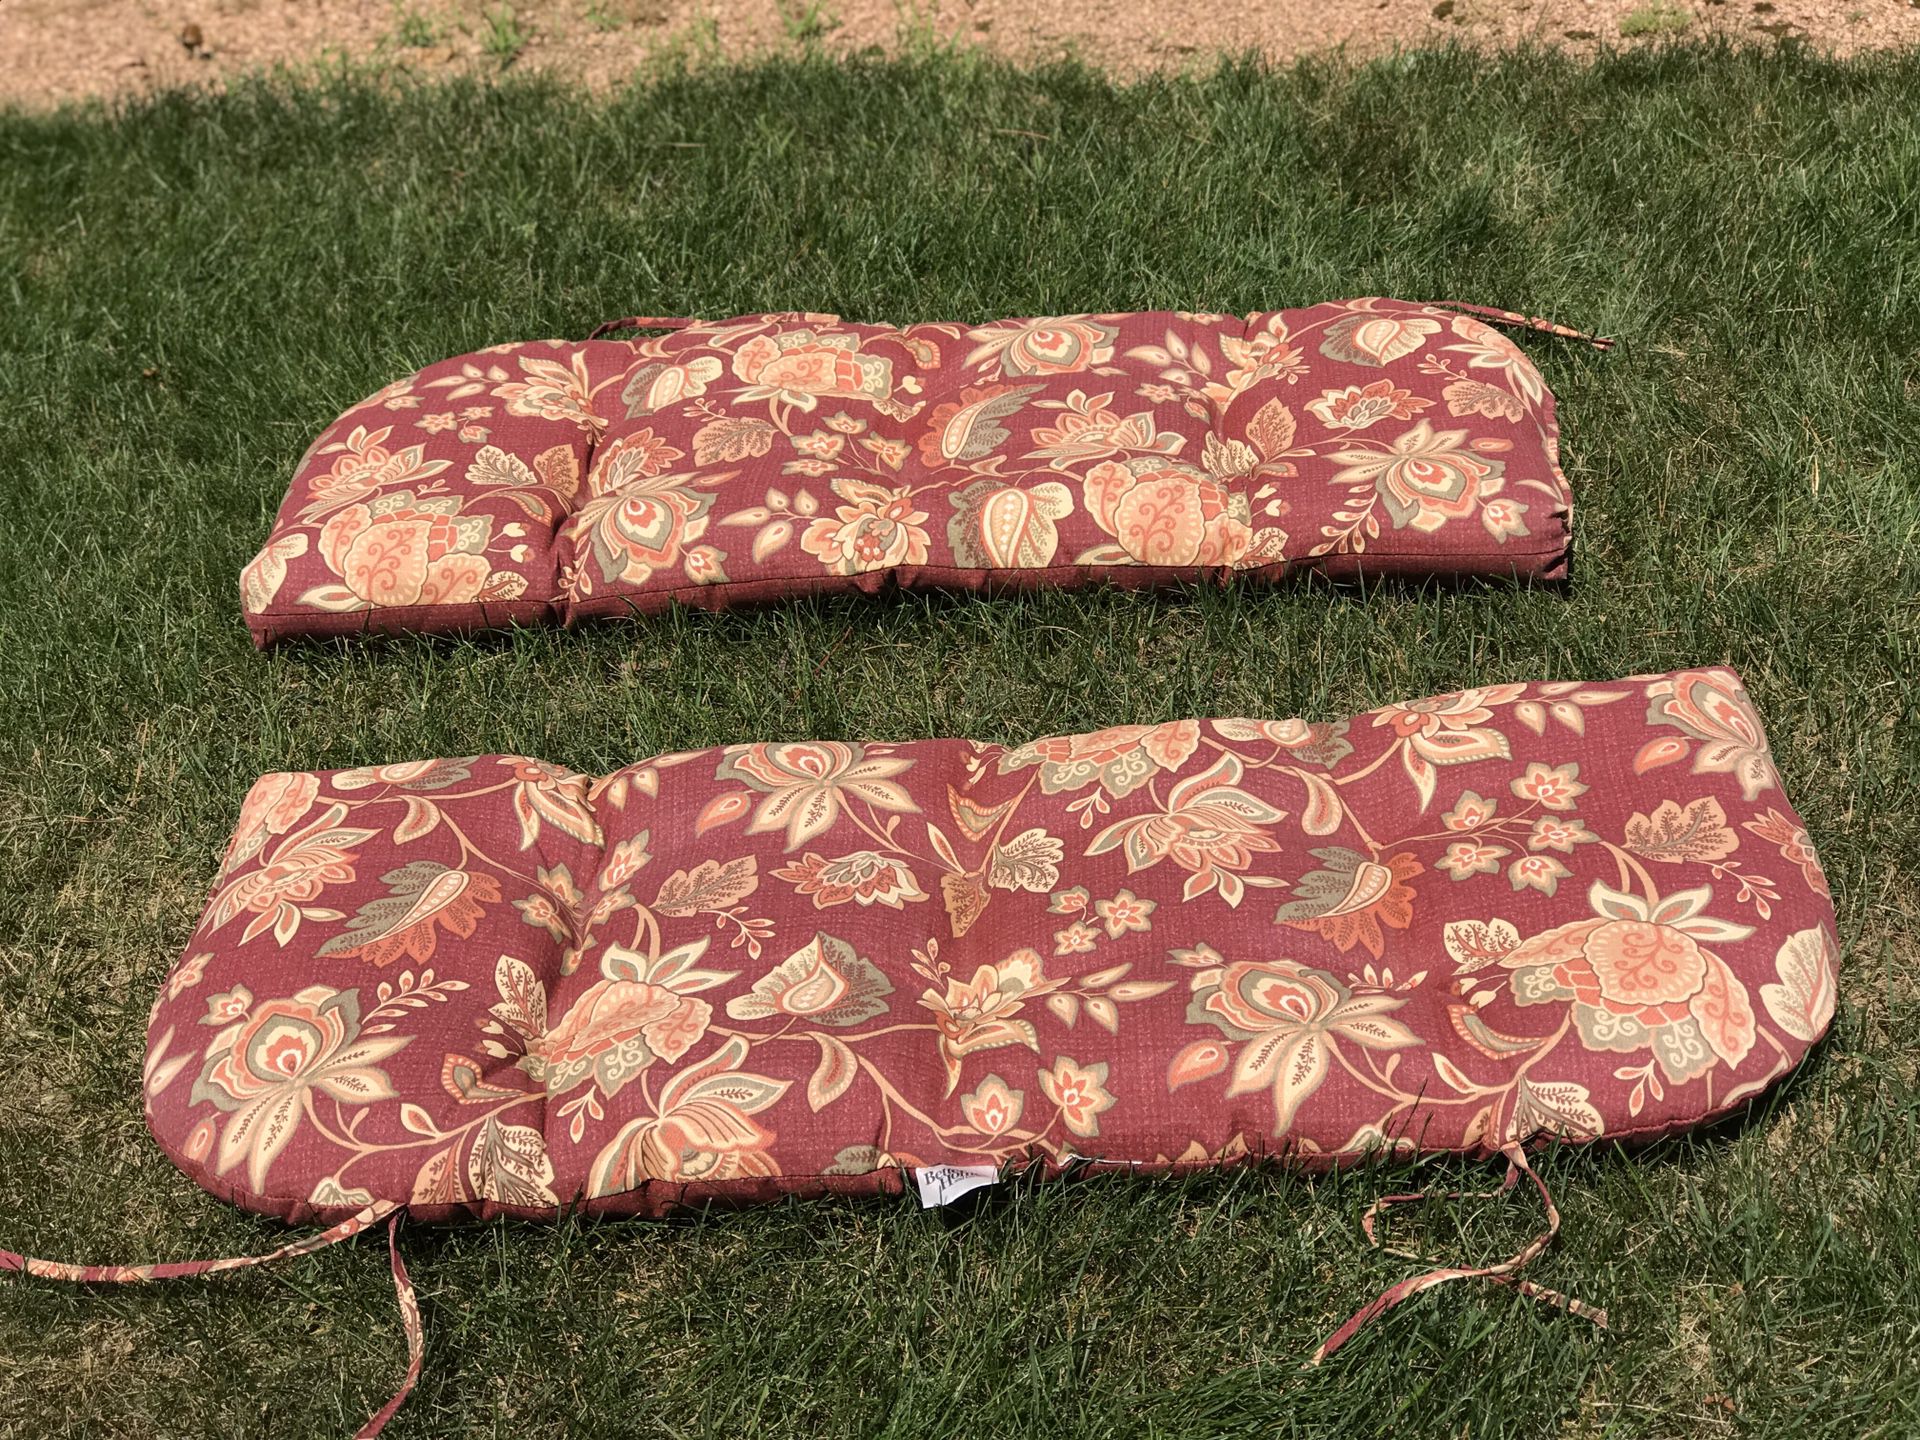 2 padded bench cushions both for $10